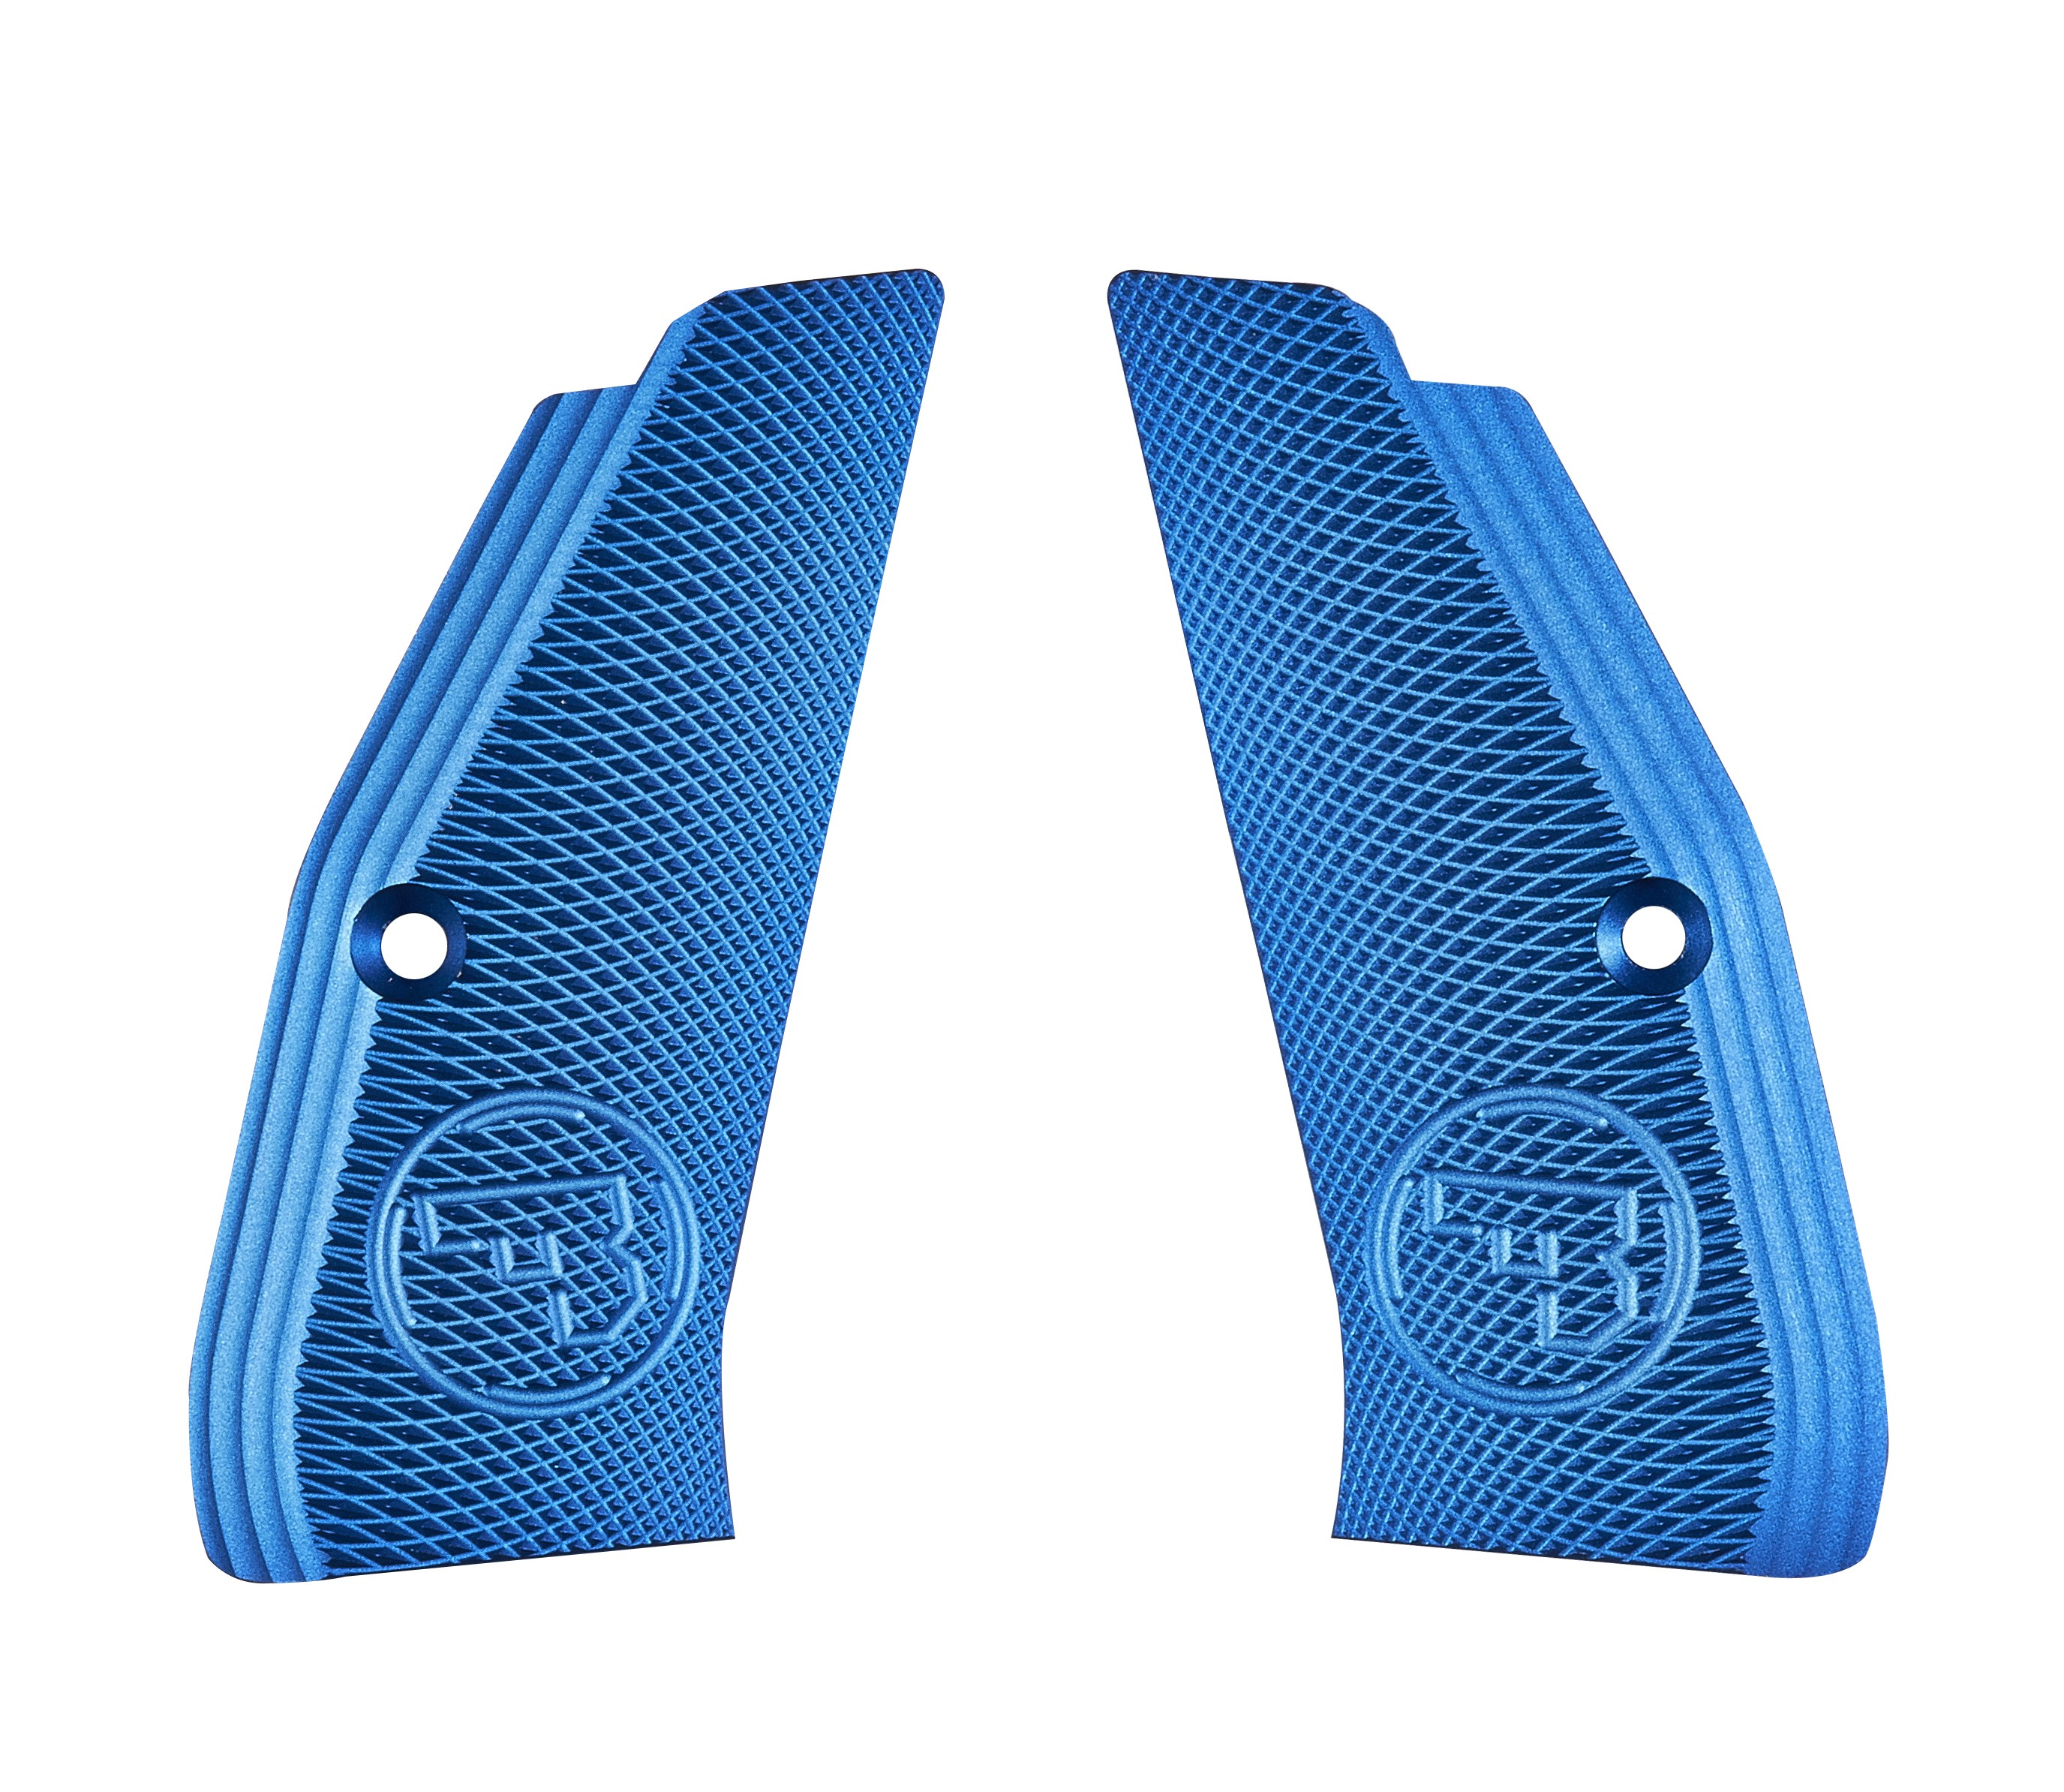 CZ 75 Grooved Grips with Funnel - Short - Colour Options - CZUB®